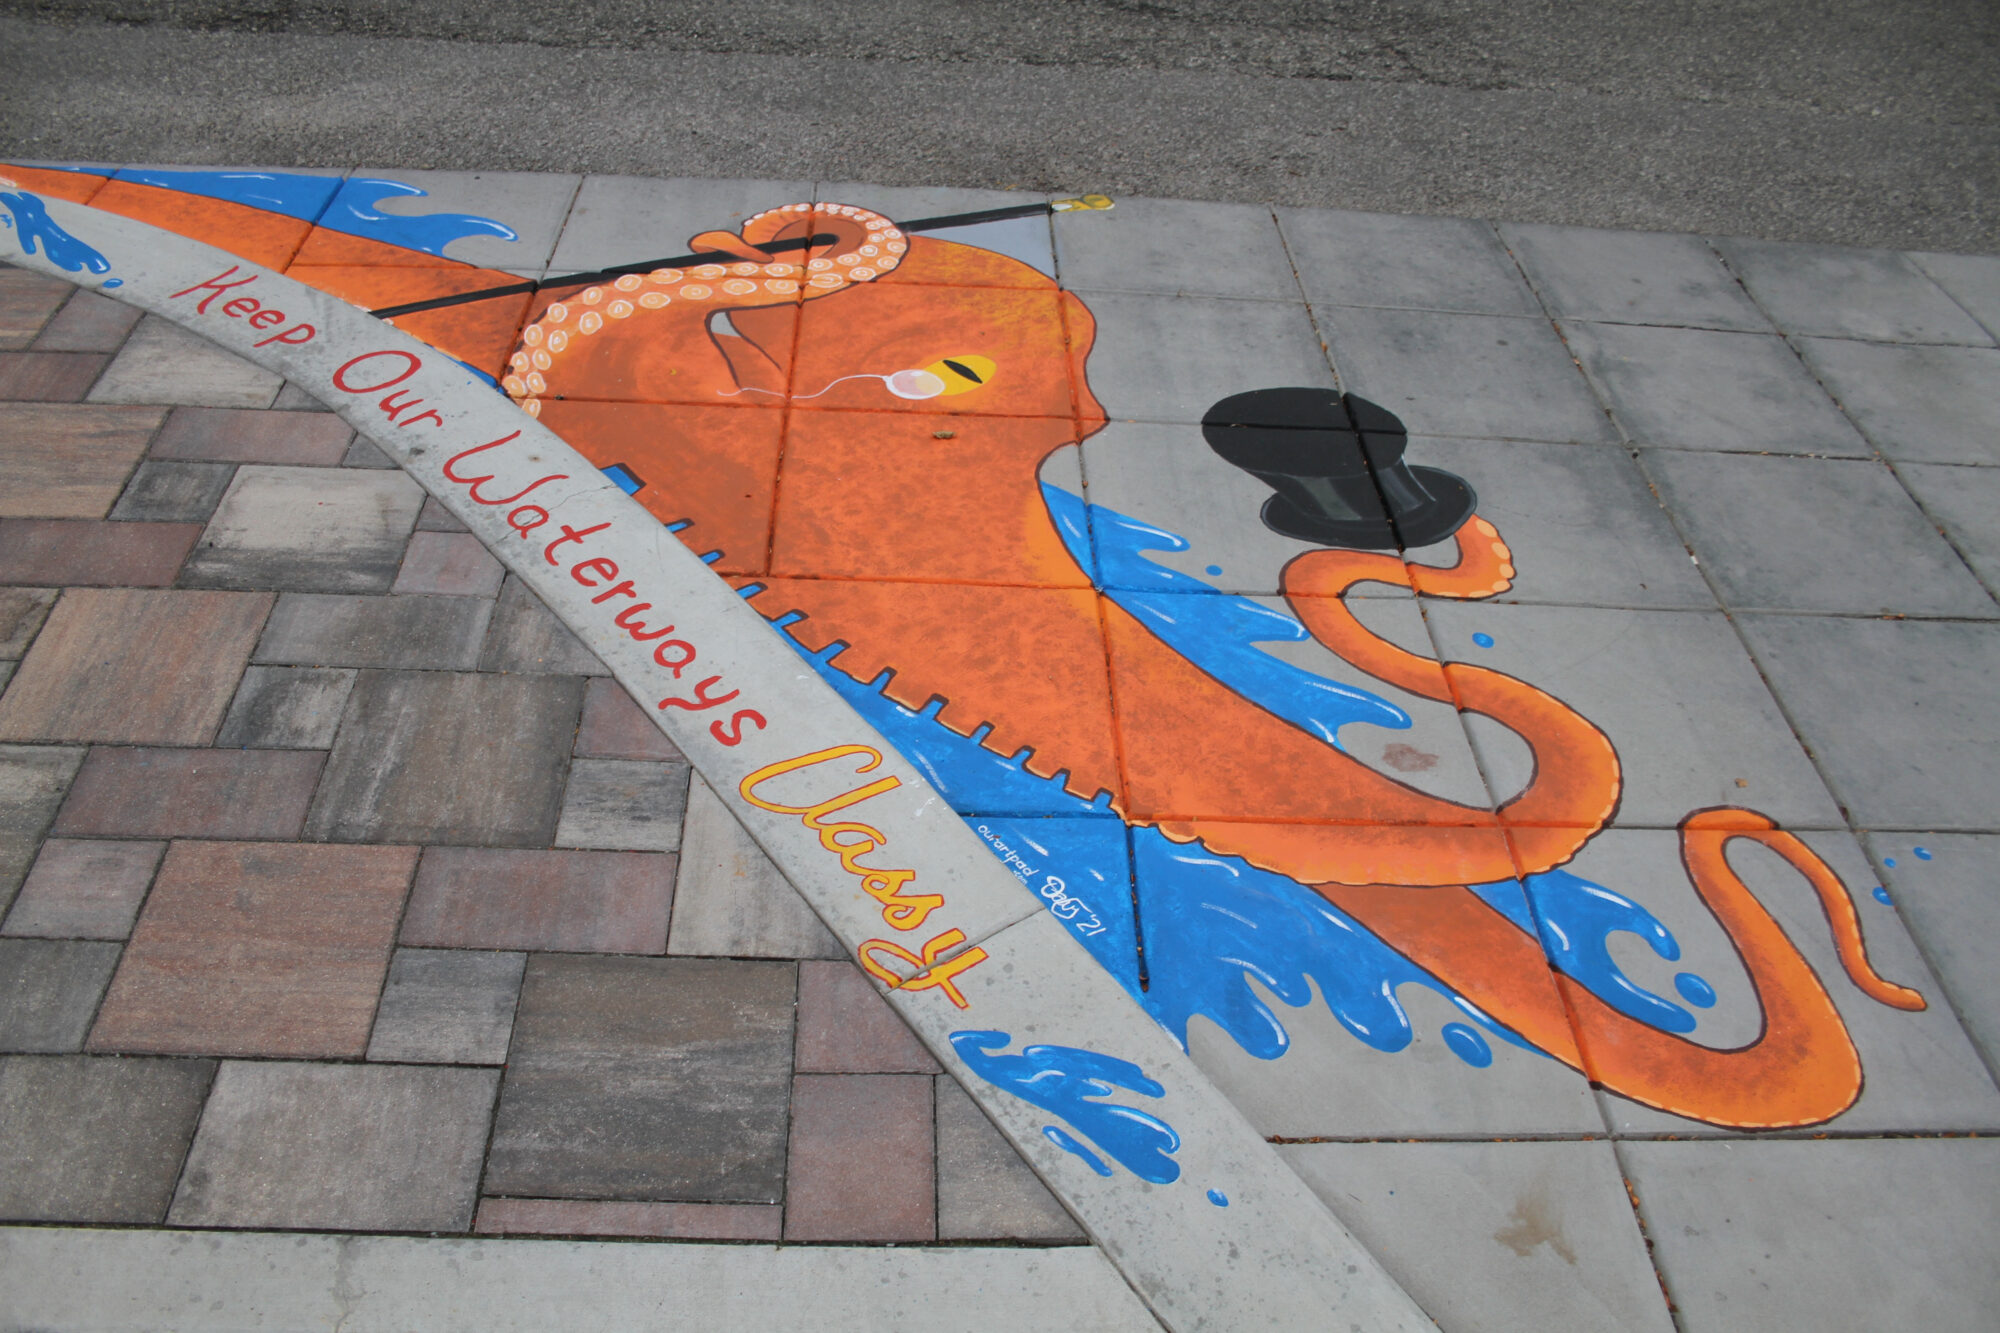 Clean Drains mural depicting an octopus with a top hat.